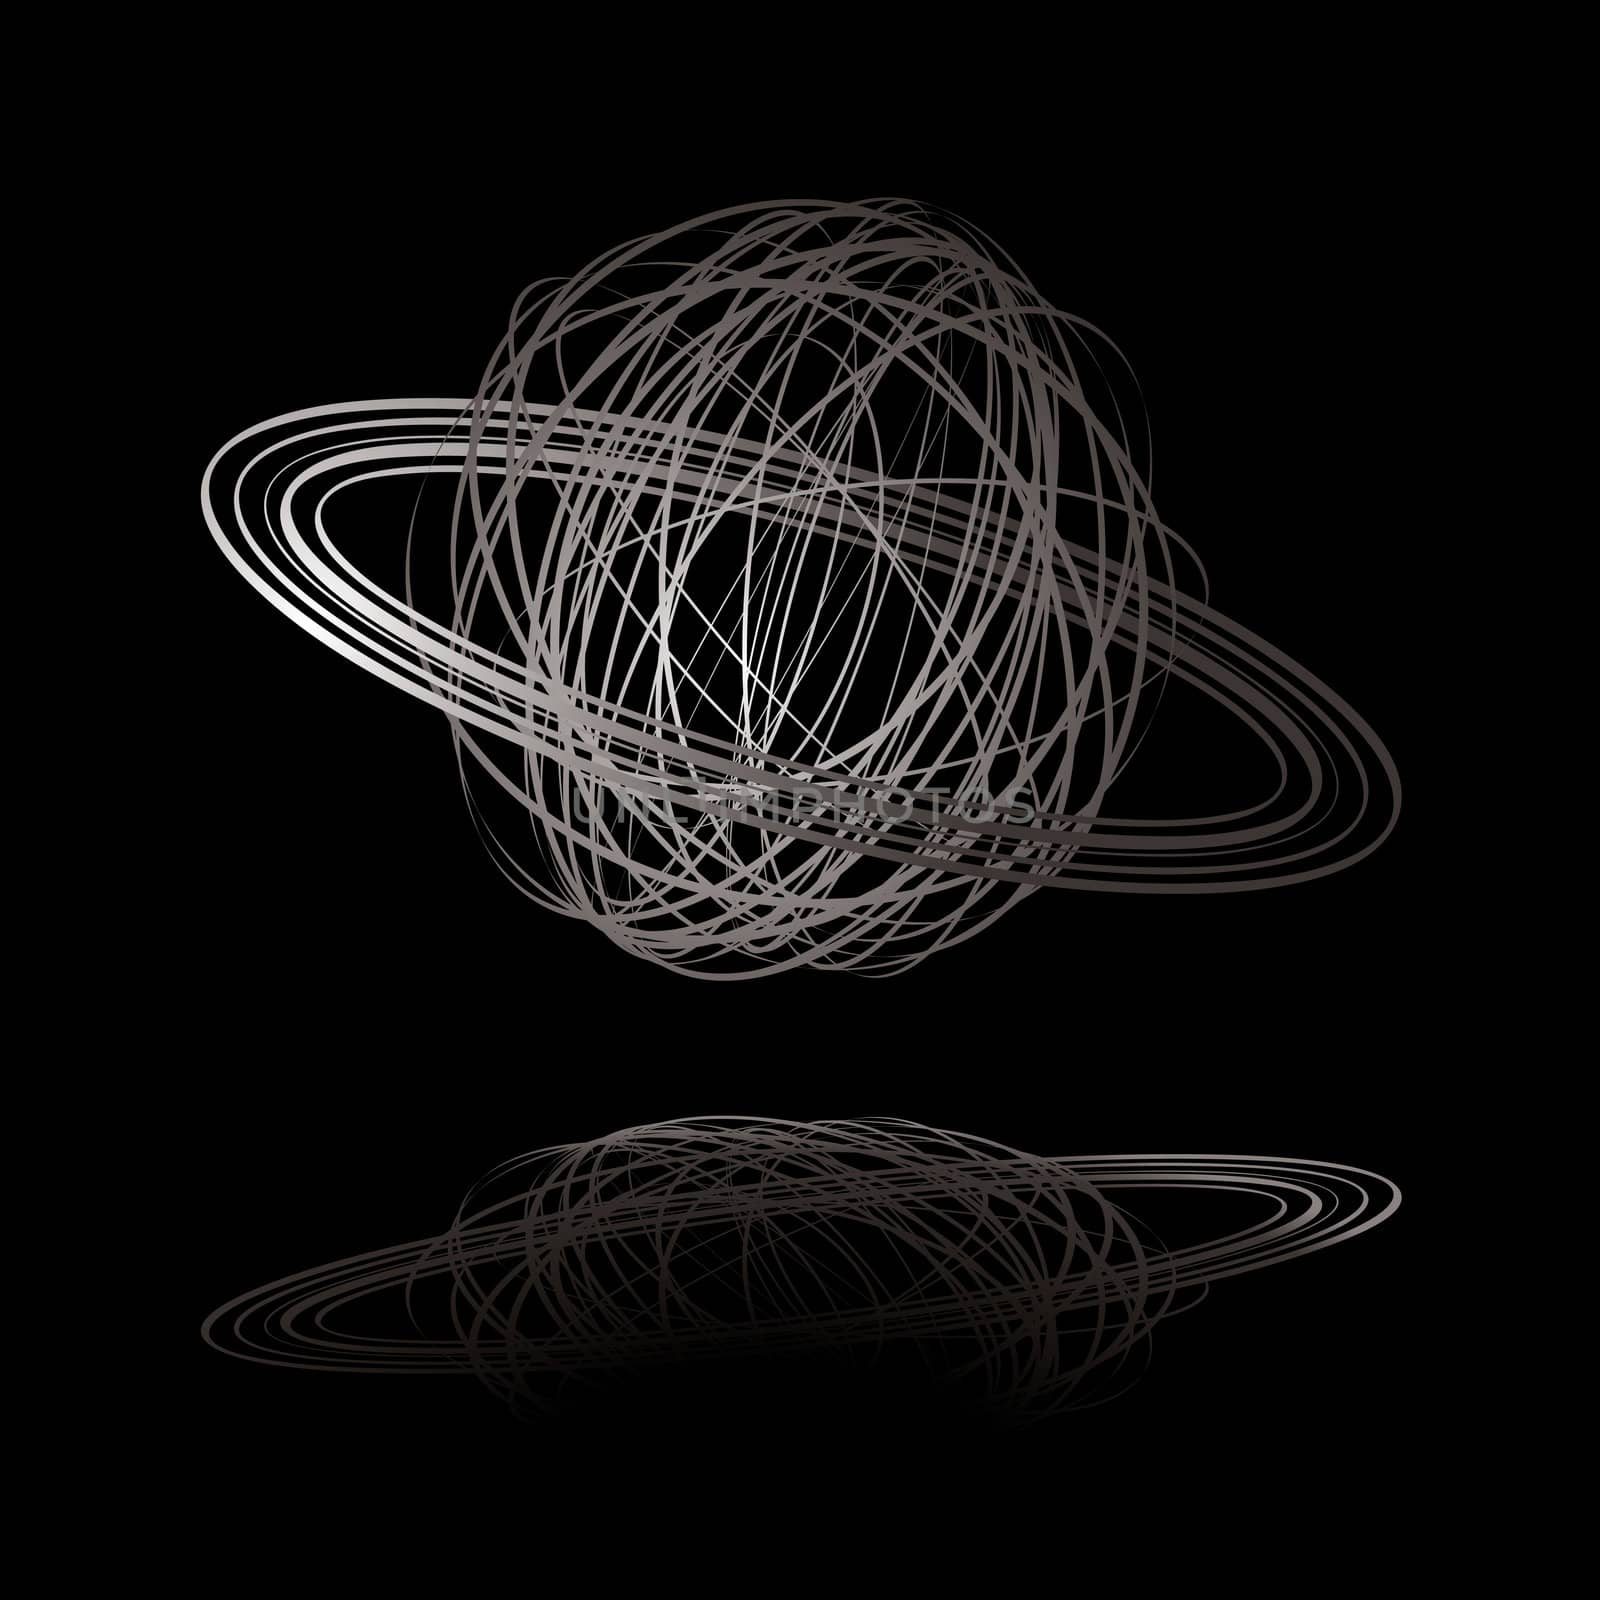 Saturn inspired scribble world with shadow on a black background